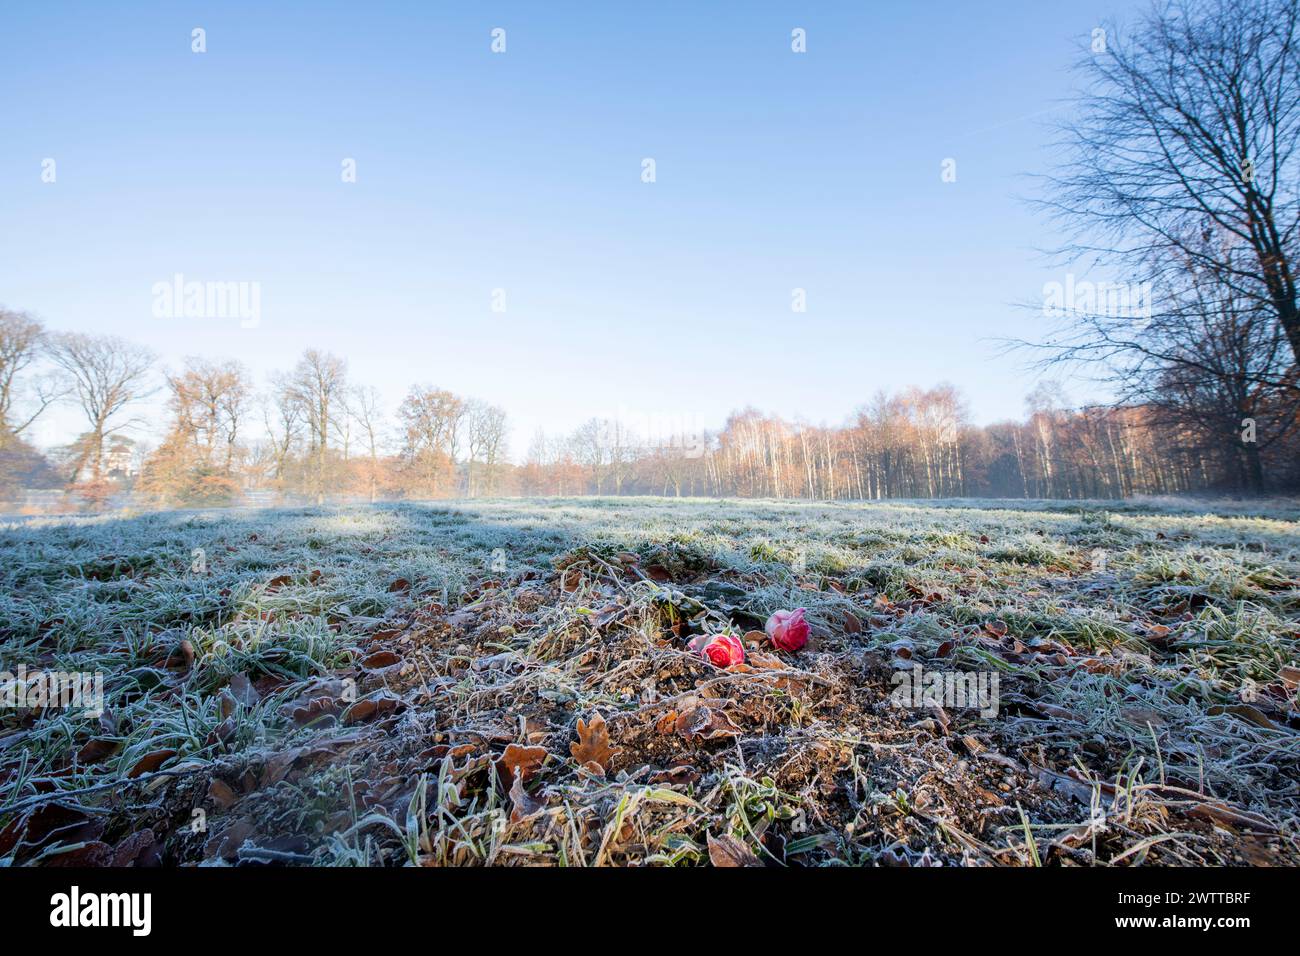 A serene frosty morning with apples lying on the ground Stock Photo